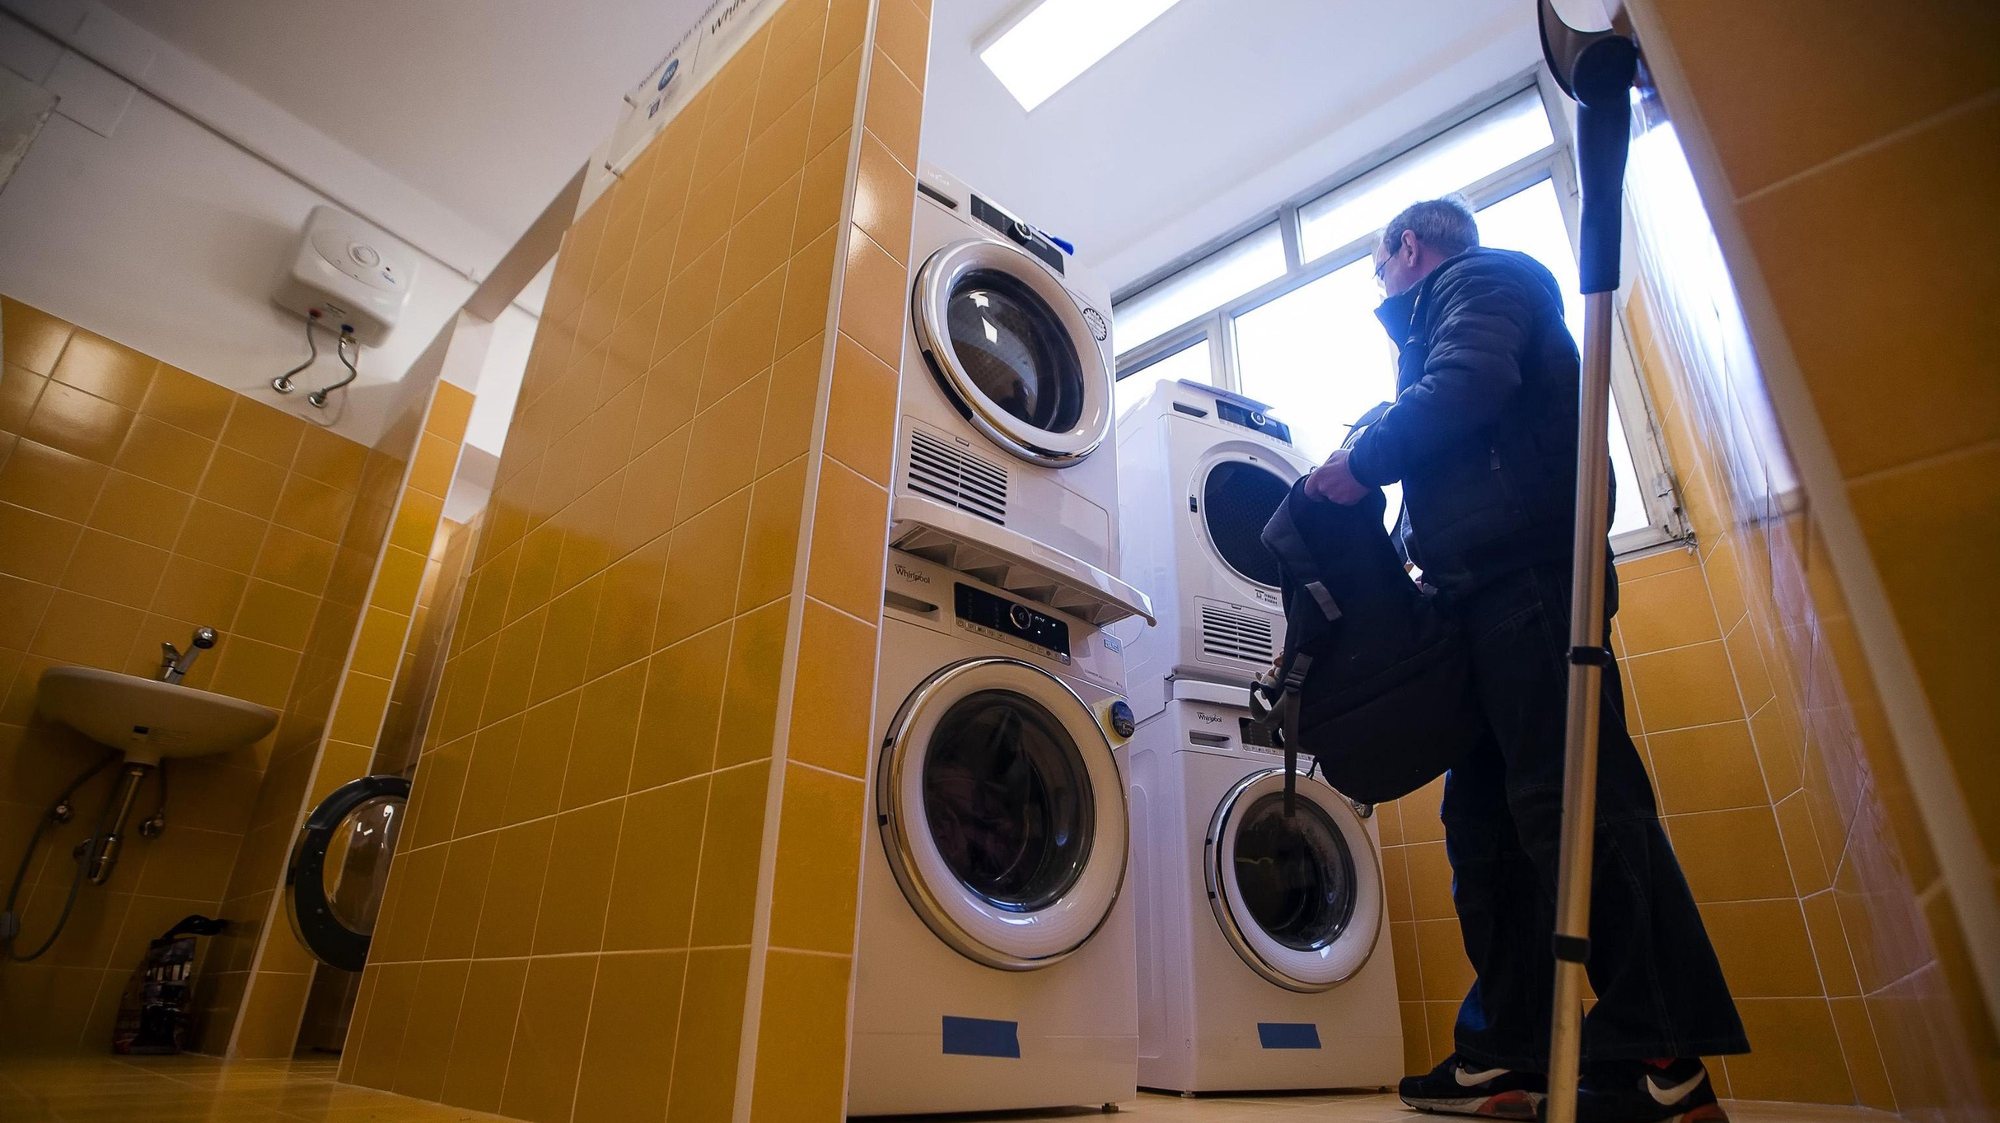 epa05902551 A man fills a dryer with clothes in the &#039;Papa Francesco Laundry&#039;, a free laundry service for poor people, in Rome, Italy, 11 April 2017. The project initiated by Pope Francis and supported by a washing machine brand and a detergent producer is dedicated particularly to homeless people, giving them a place to wash, dry and iron their clothes and blankets.  EPA/ANGELO CARCONI